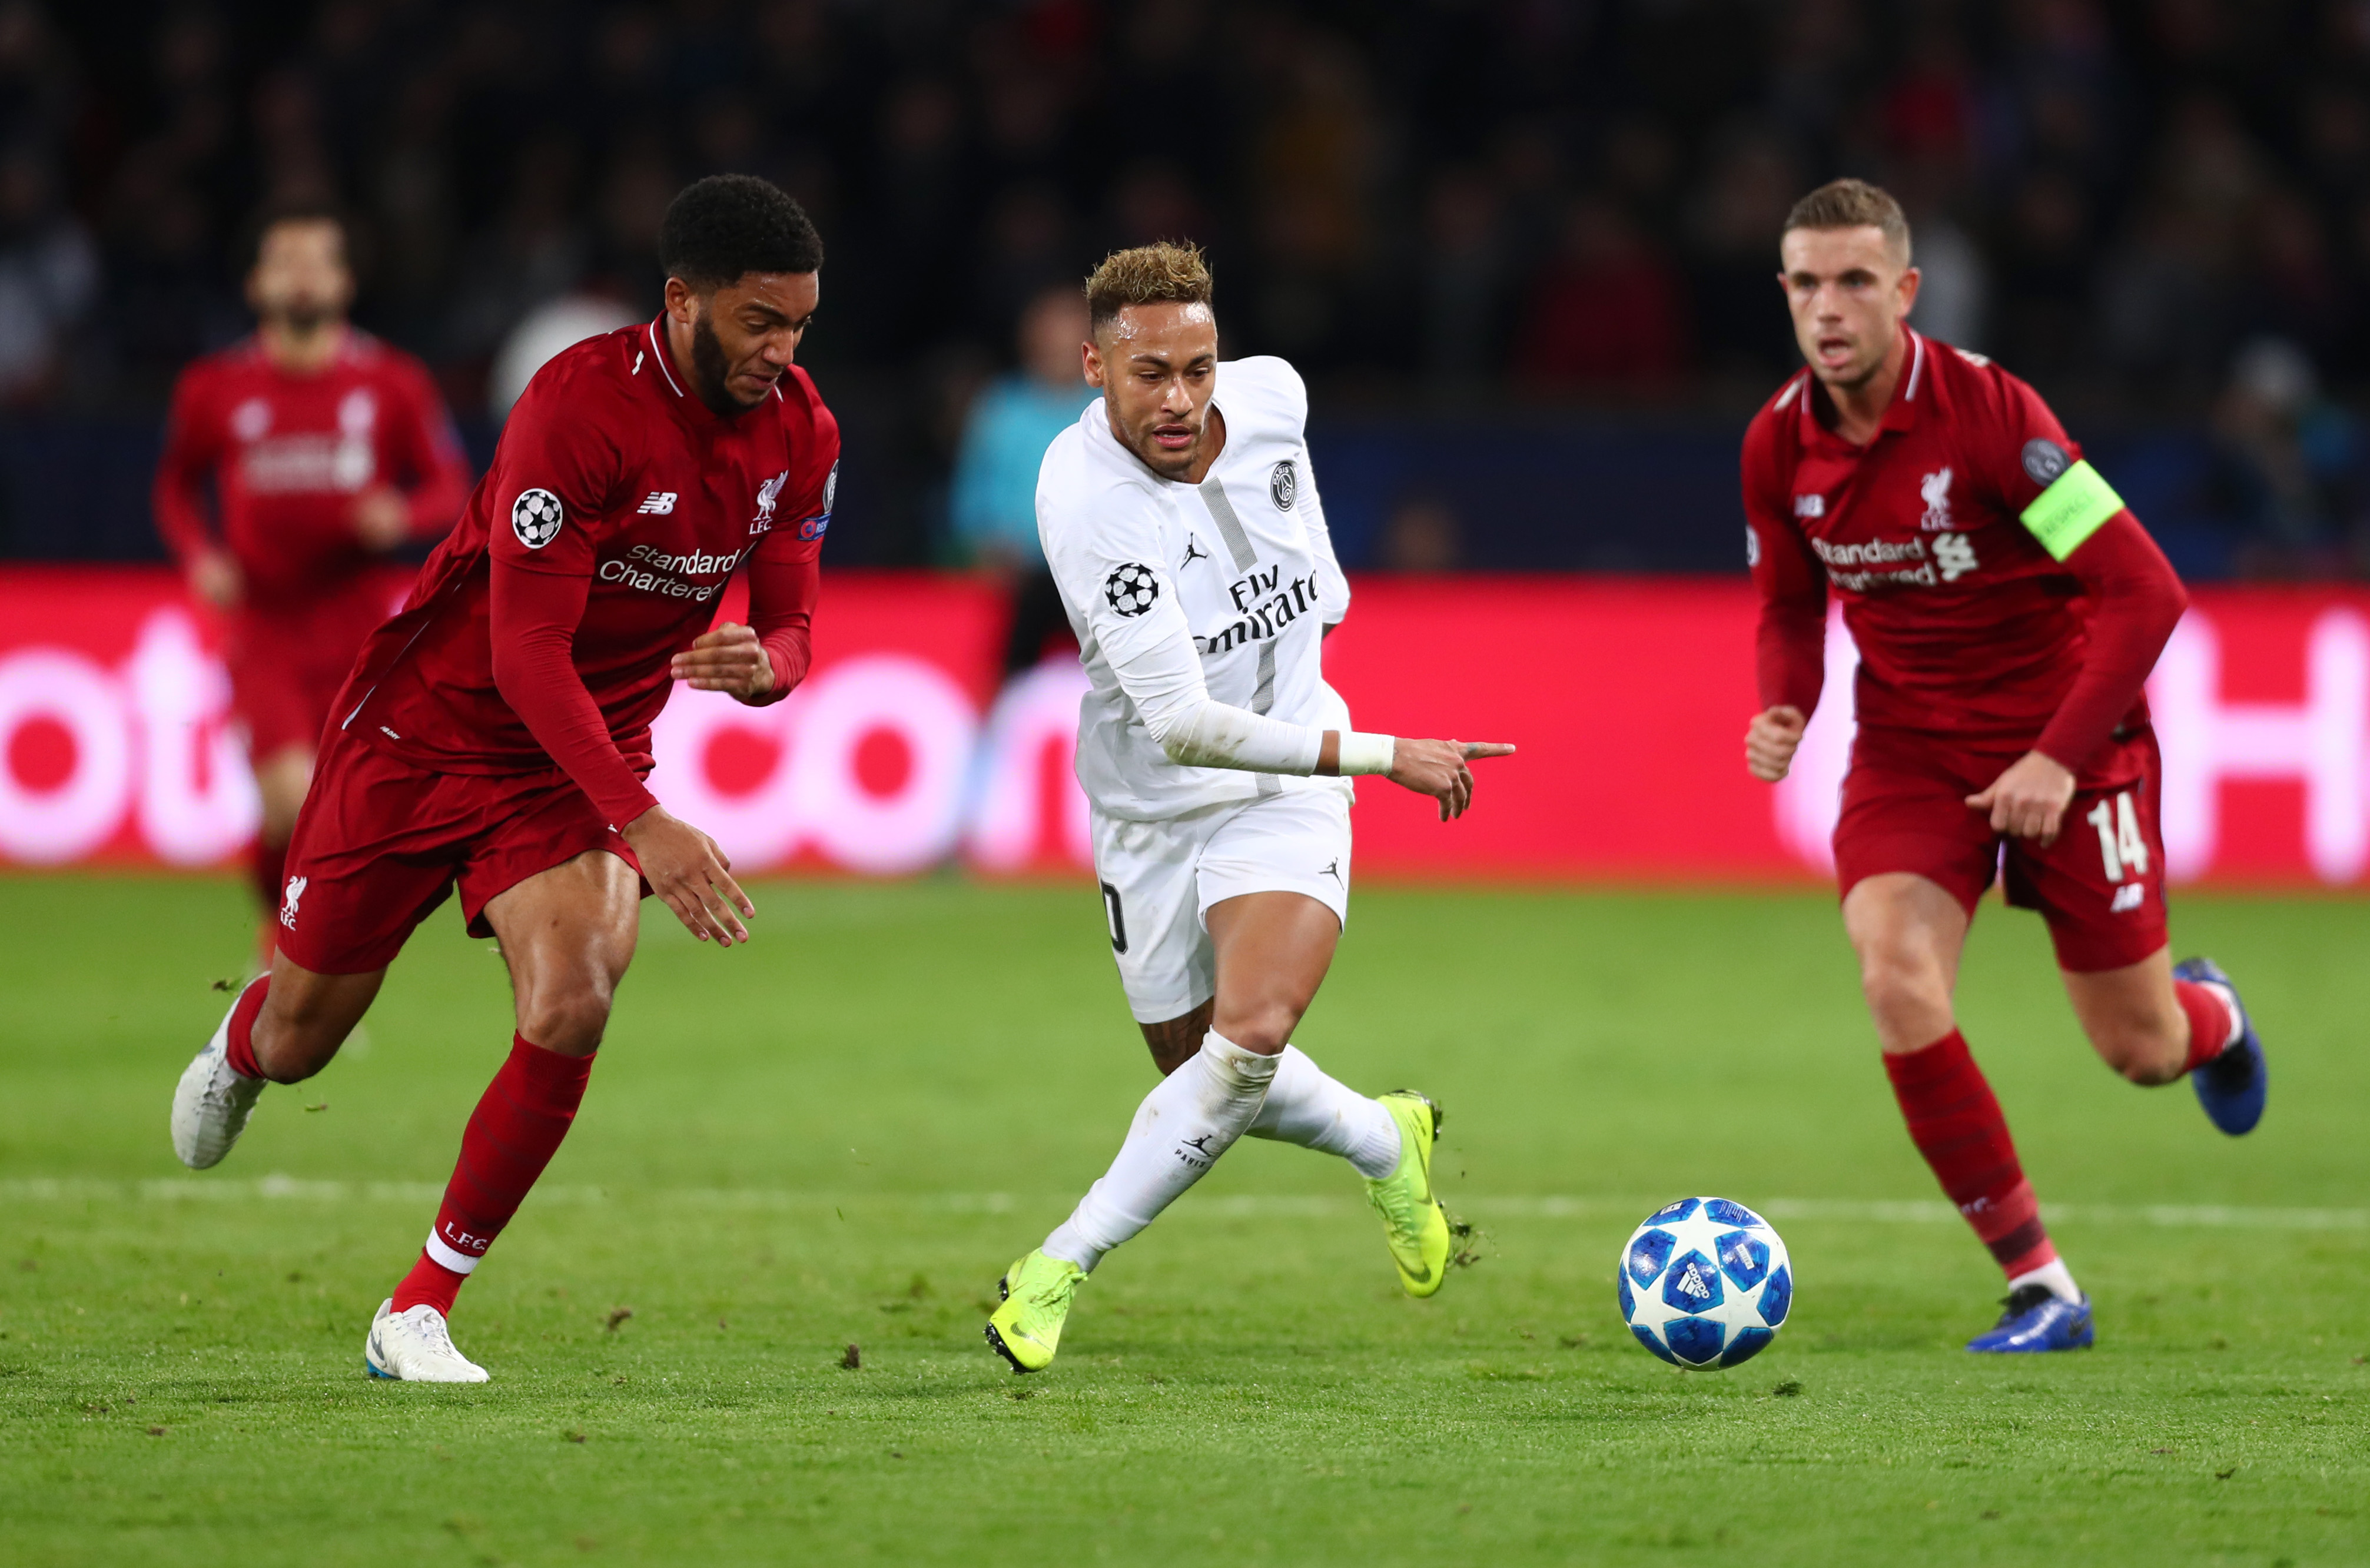 PARIS, FRANCE - NOVEMBER 28:  Neymar of Paris Saint-Germain is challenged by Joe Gomez and Jordan Henderson of Liverpool during the UEFA Champions League Group C match between Paris Saint-Germain and Liverpool at Parc des Princes on November 28, 2018 in Paris, France.  (Photo by Clive Rose/Getty Images)